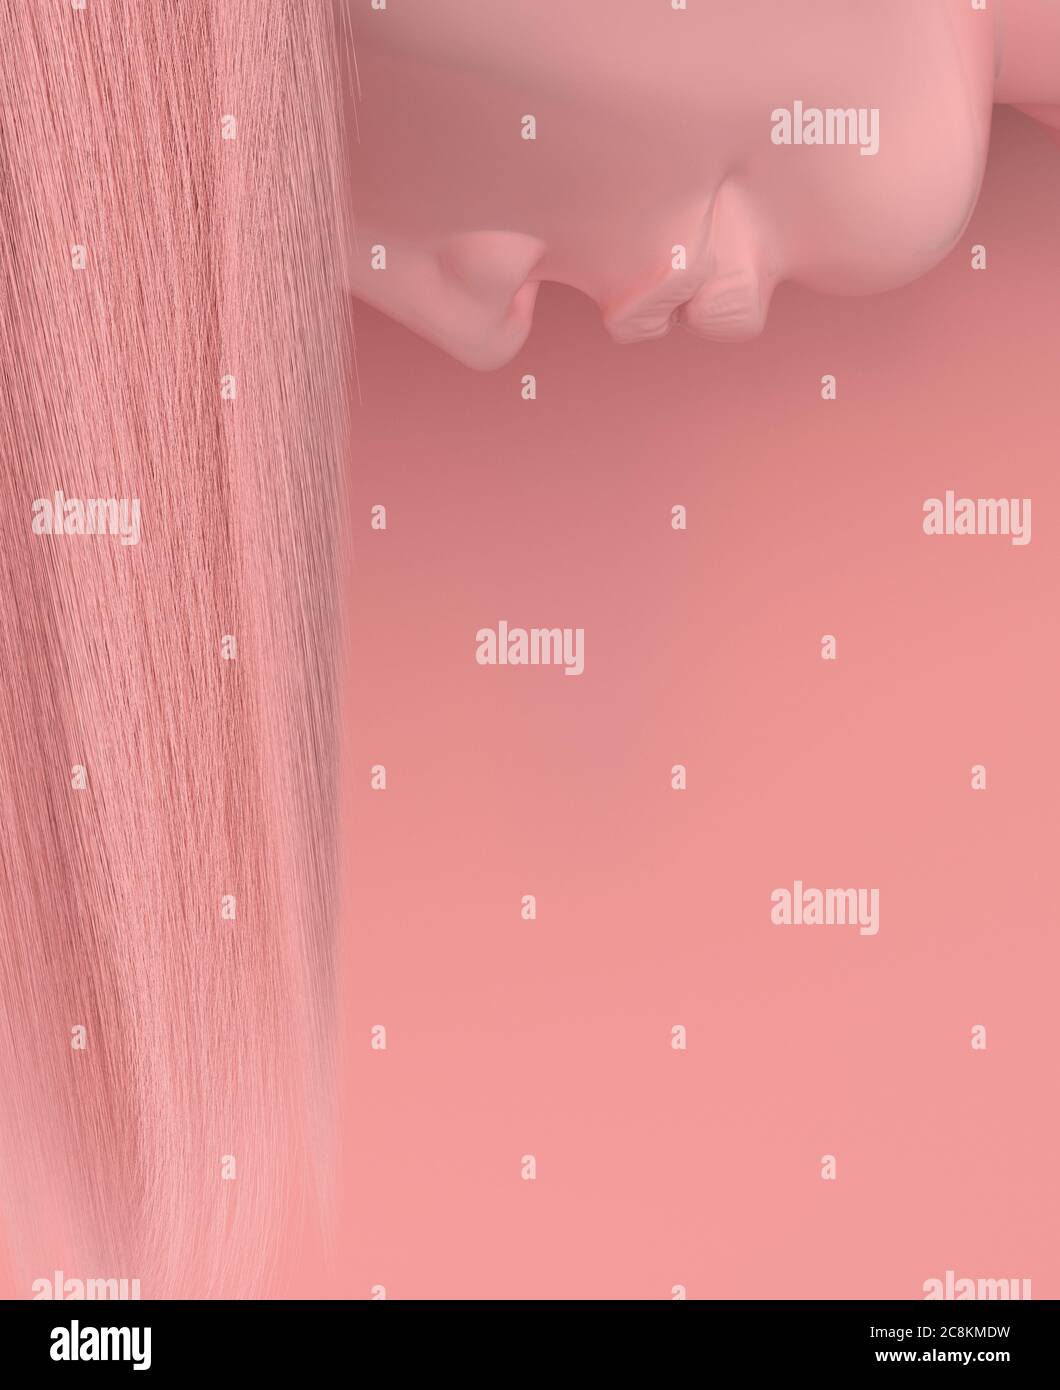 Woman's face upside down with long flowing pink hair on a pink background. Colorful hair. Creative conceptual illustration with copy space. 3D render Stock Photo